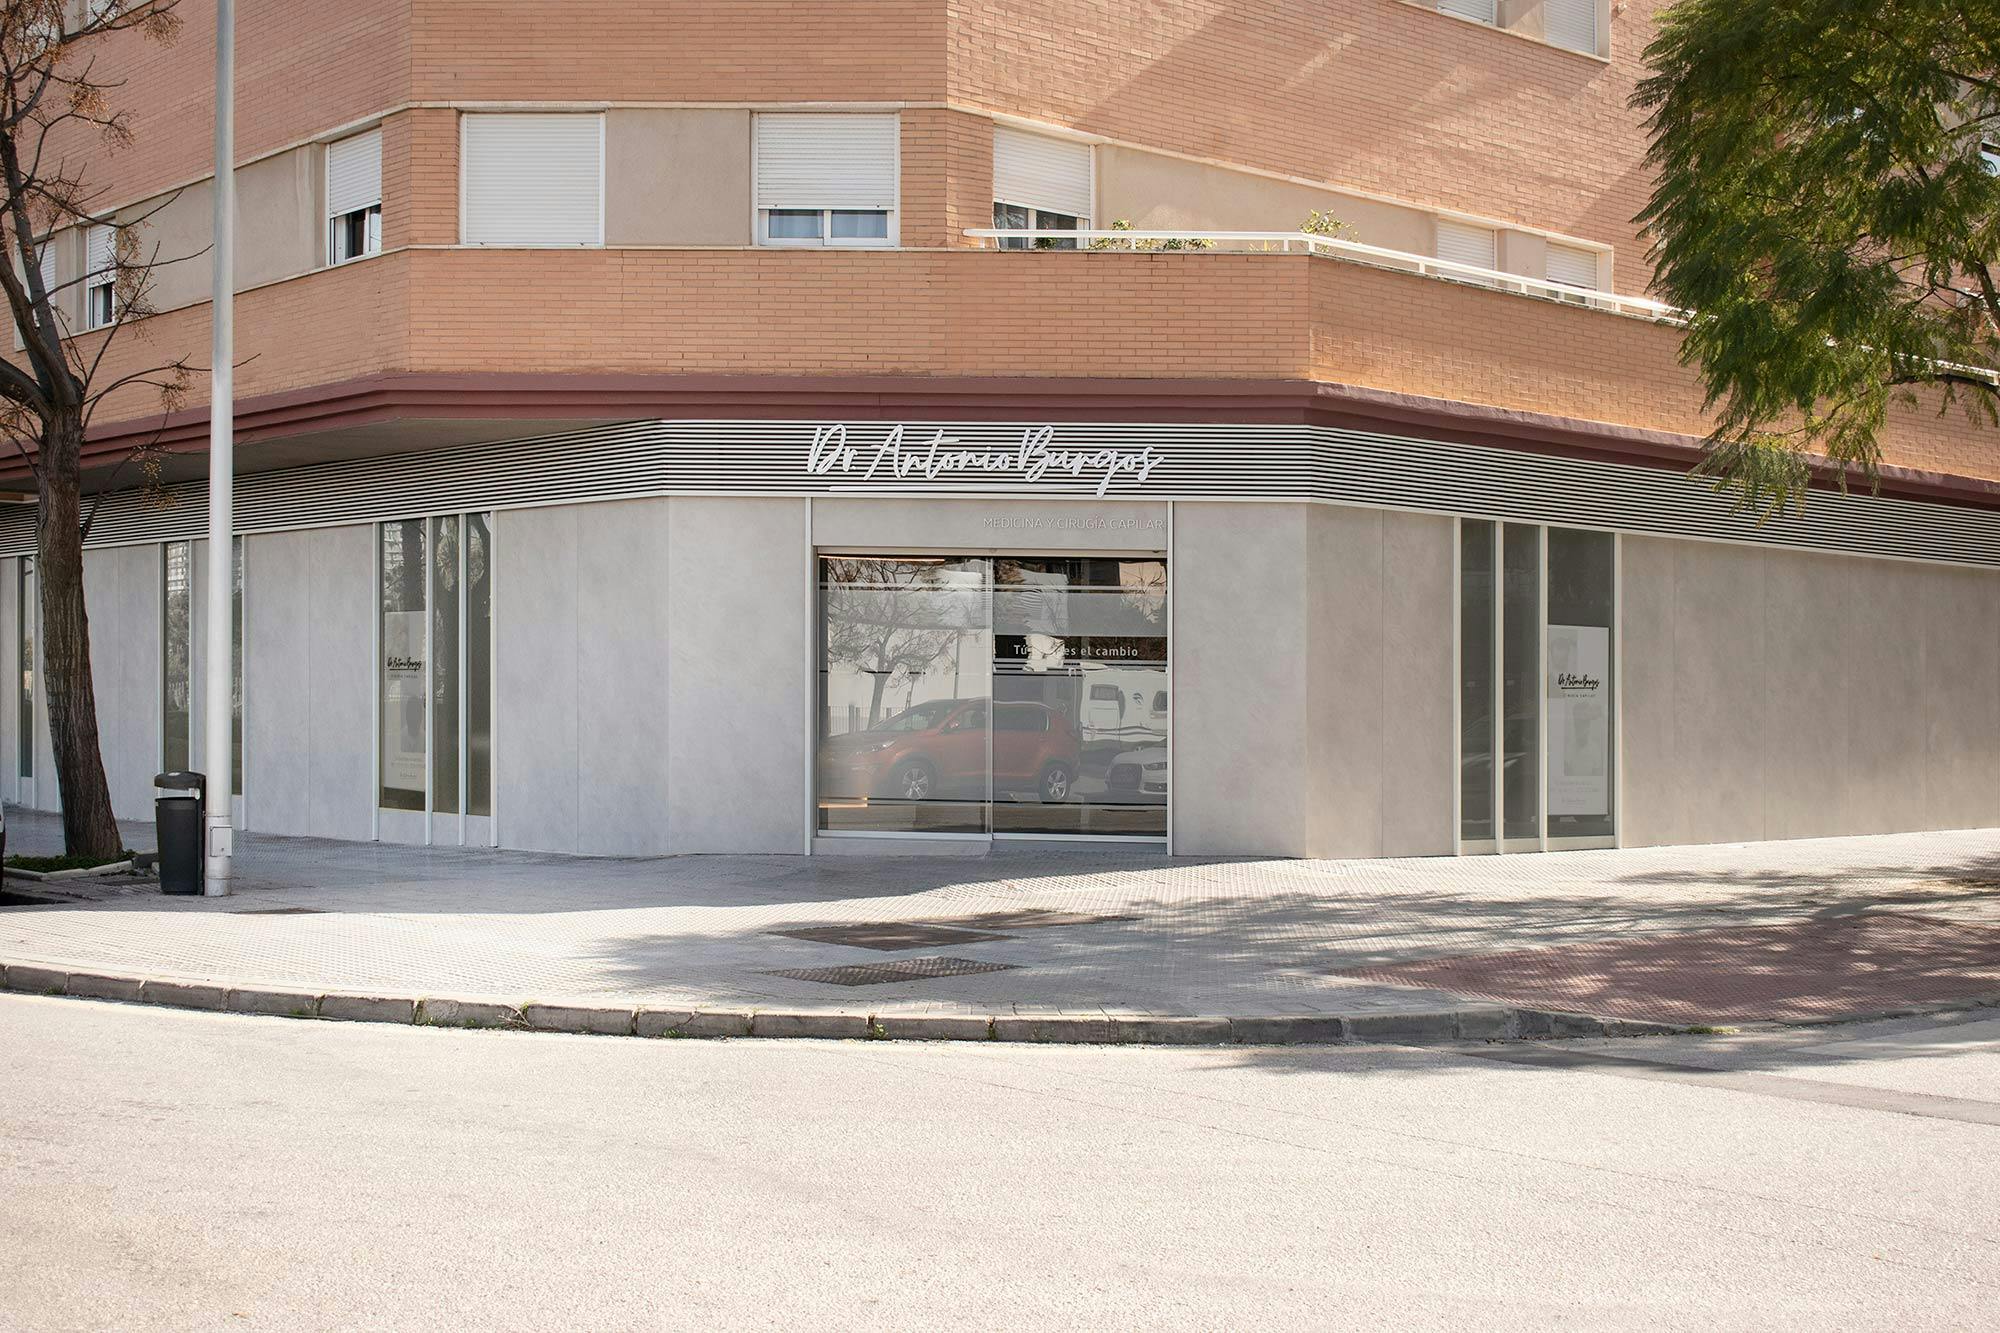 Numero immagine 32 della sezione corrente di This immaculate façade conveys the values of cleanliness, professionalism and intimacy for which the clinic is renowned di Cosentino Italia